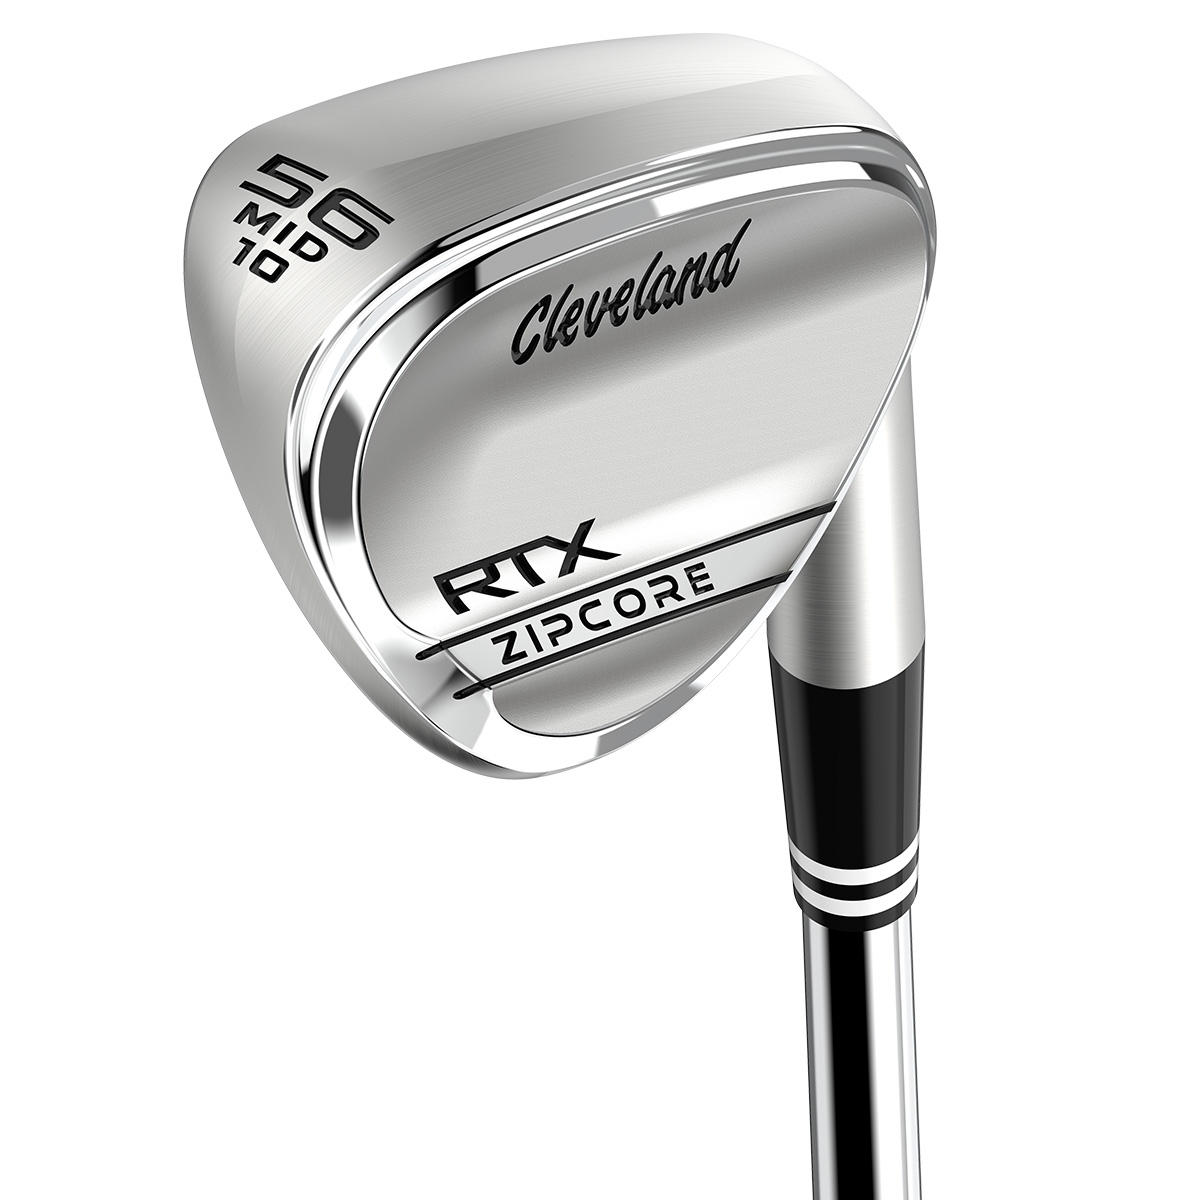 Cleveland Golf RTX ZipCore Tour Satin Wedge from american golf